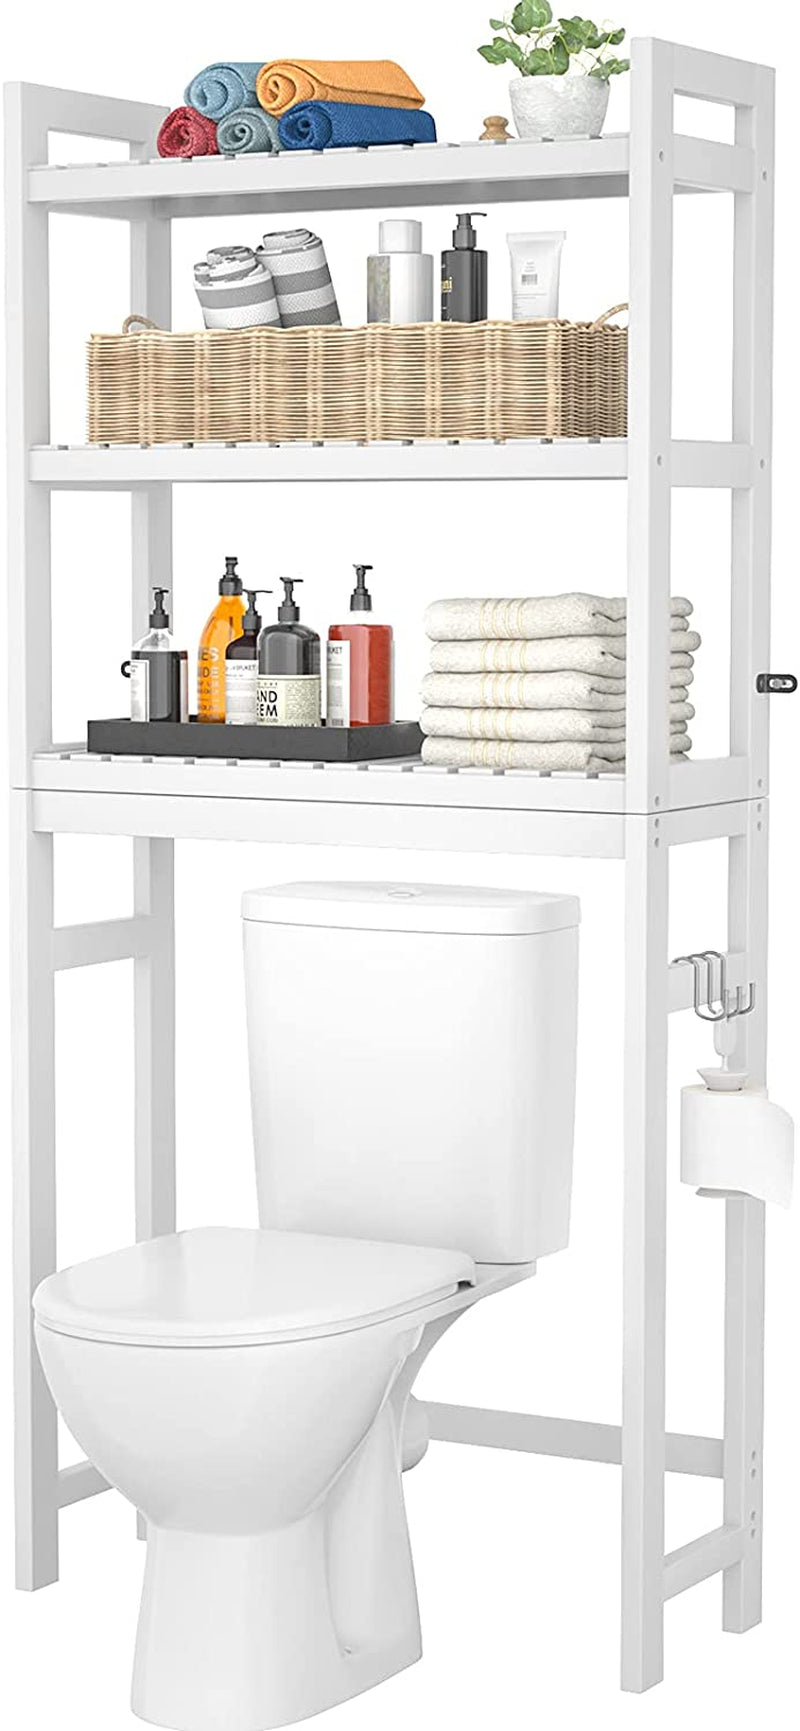 Over the Toilet Storage - Bamboo 3-Tier Over-The-Toilet Space Saver Organizer Rack